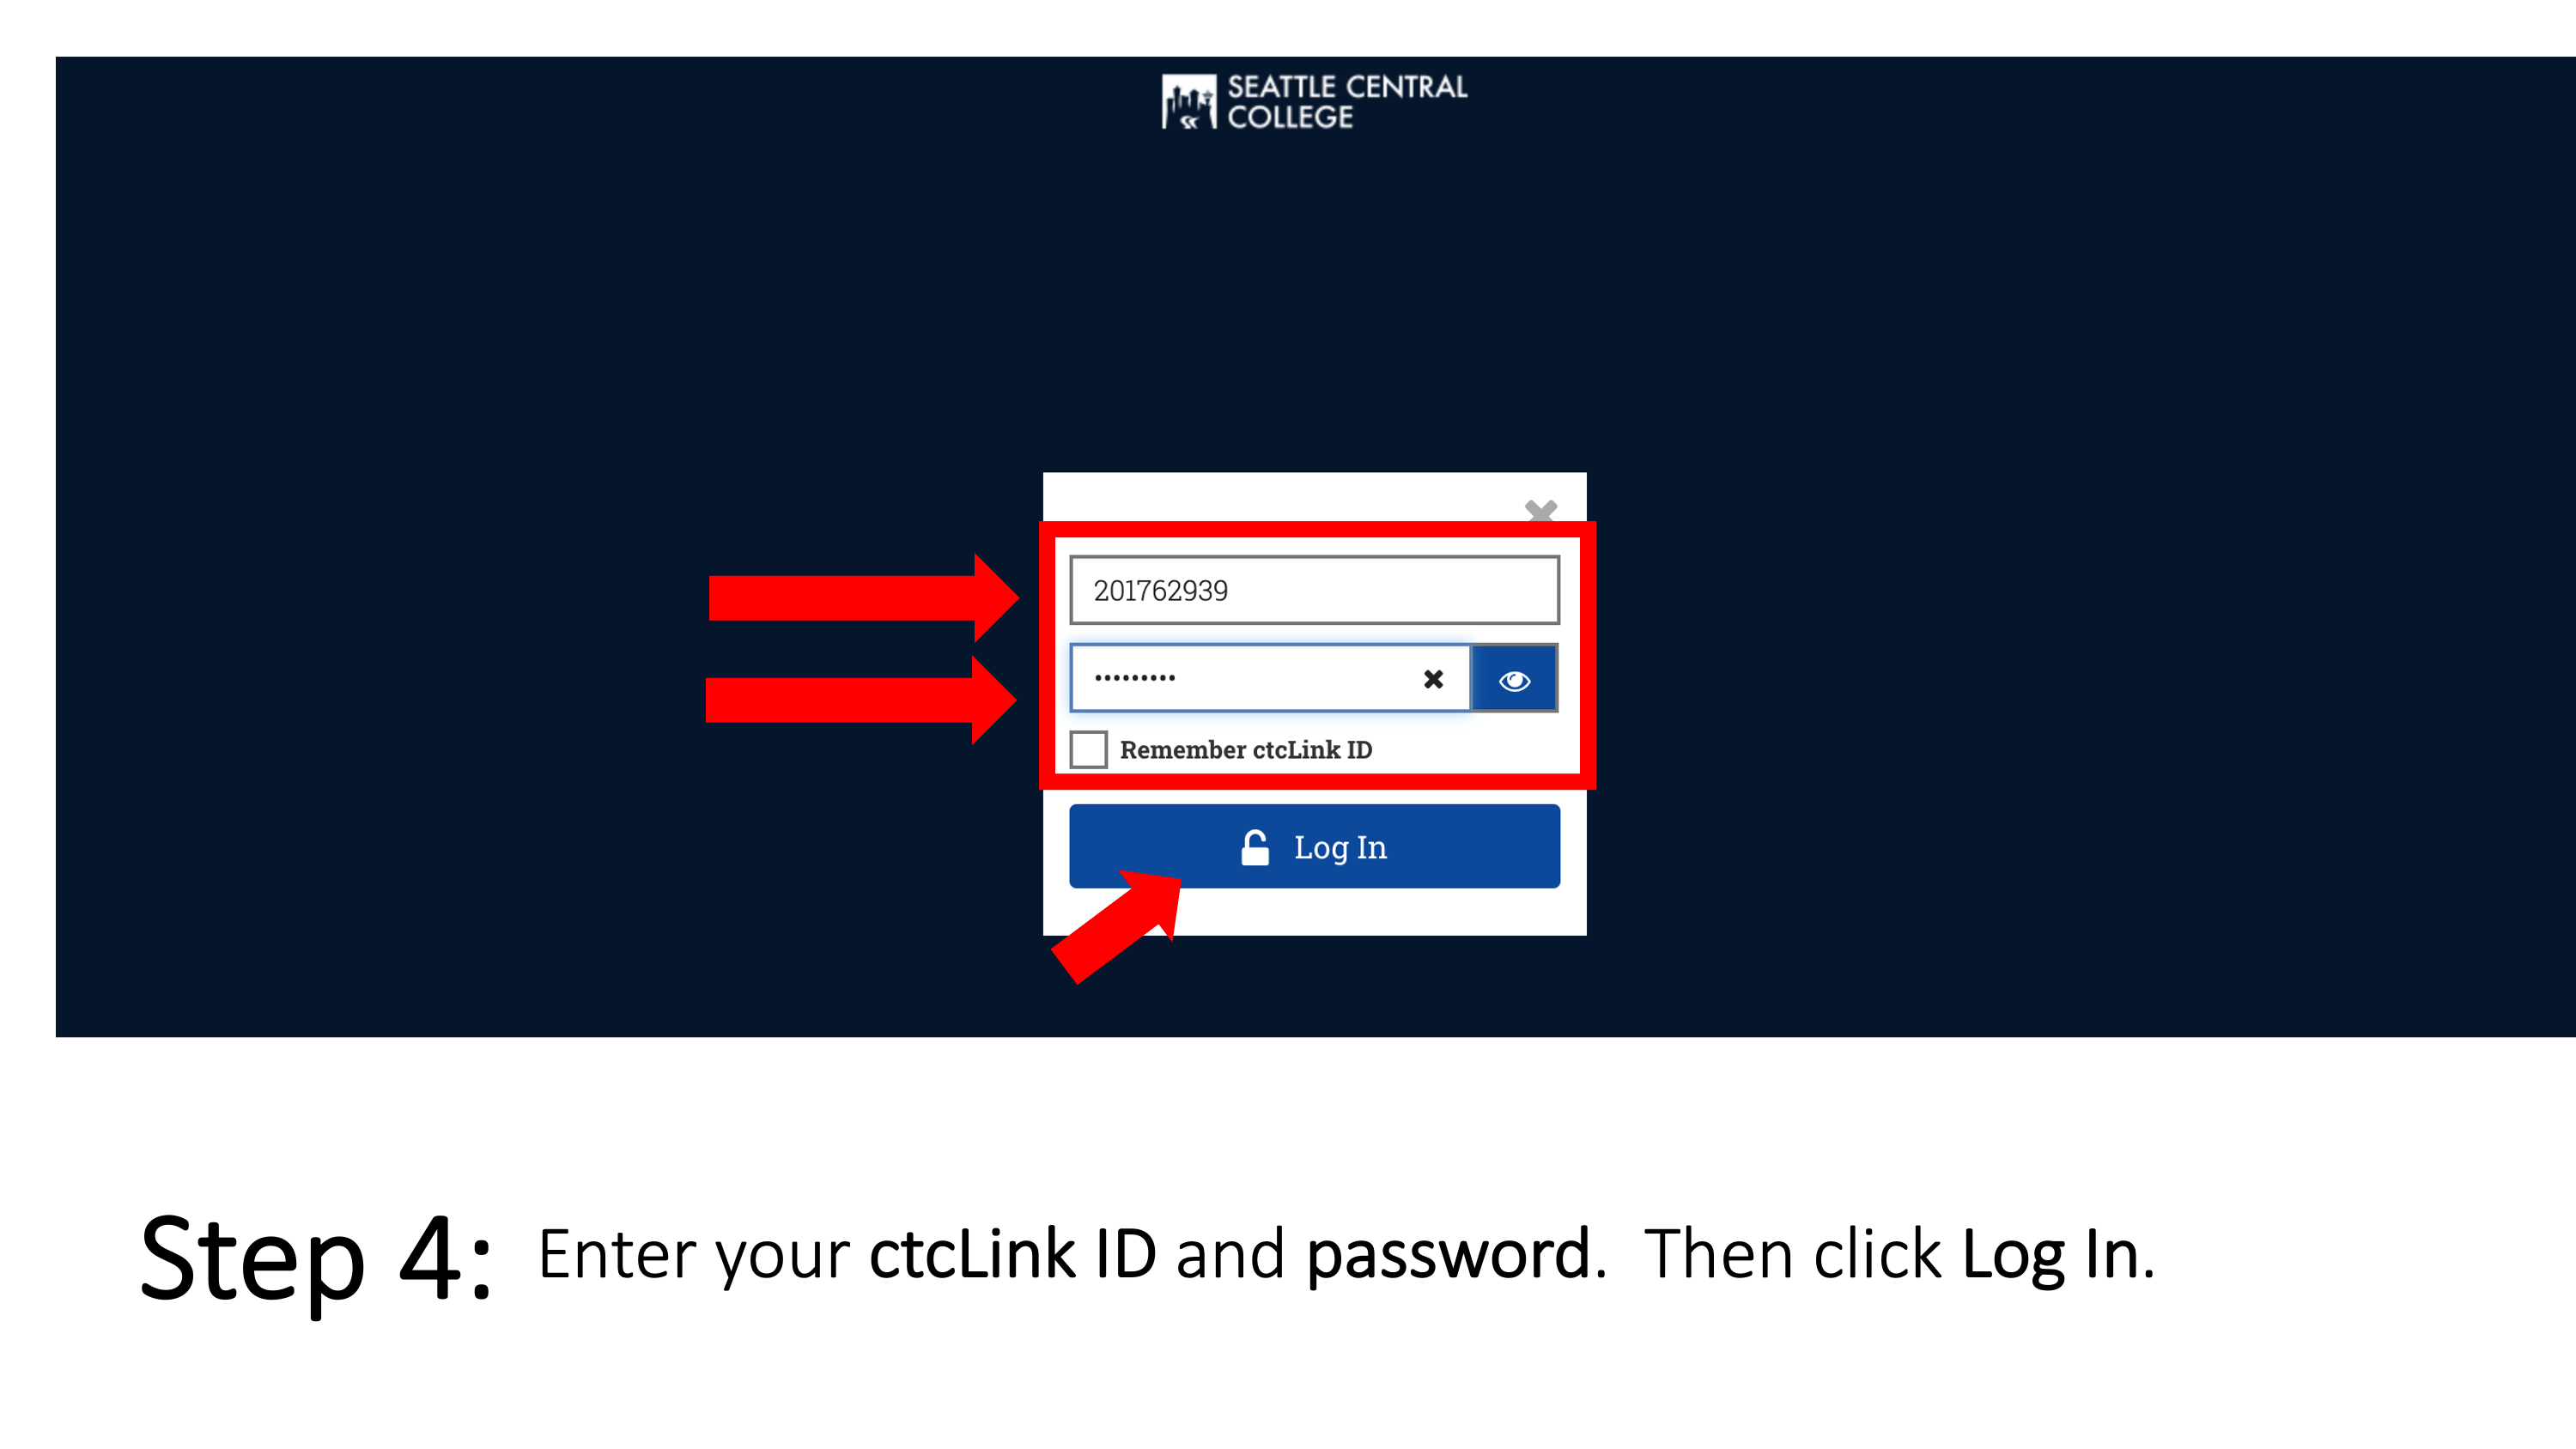 Enter your ctcLink ID and password. Then click Log In.